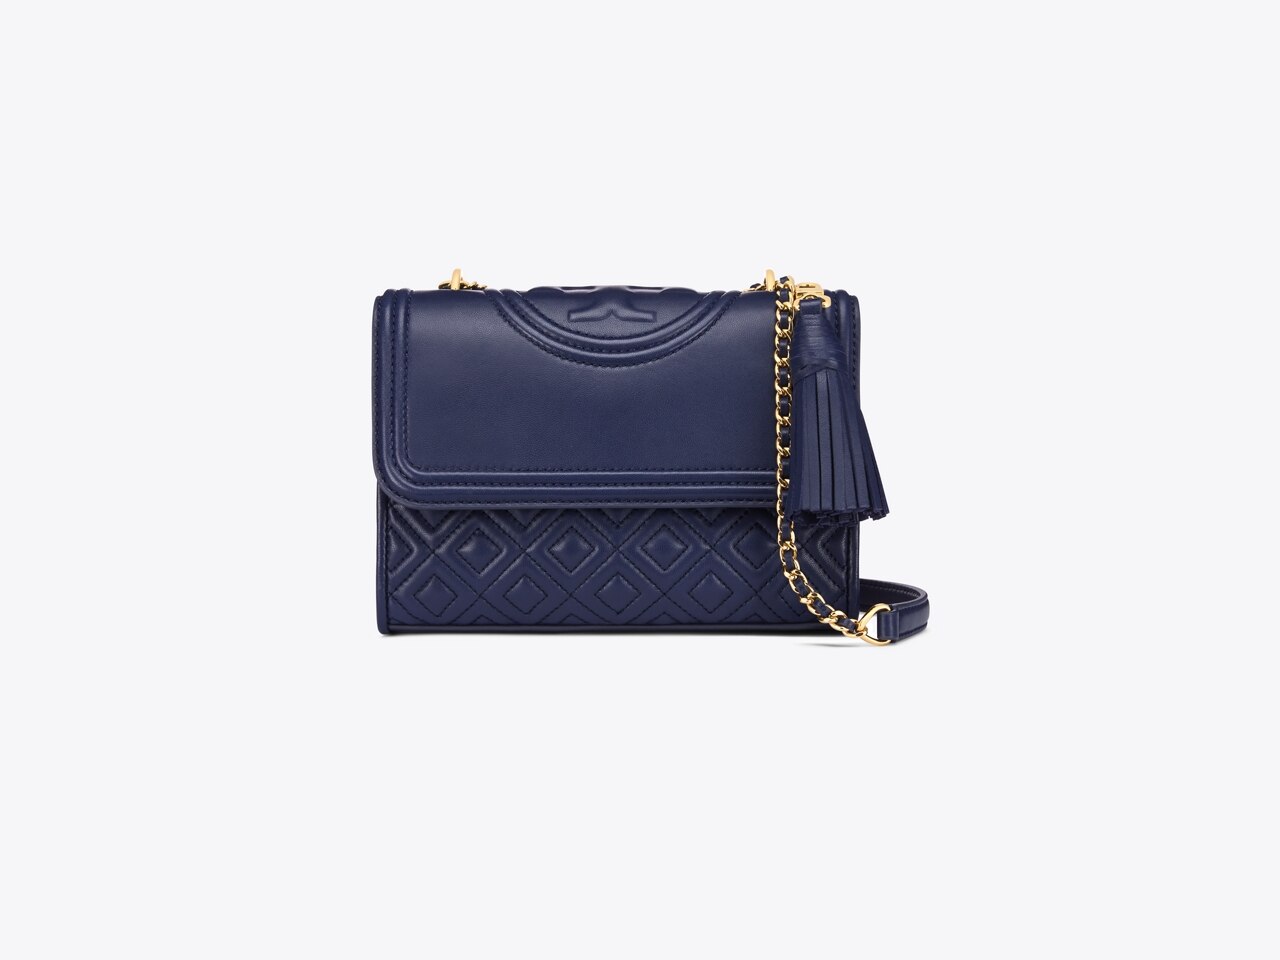 Tory Burch Fleming Navy Blue Leather Convertible Shoulder Bag